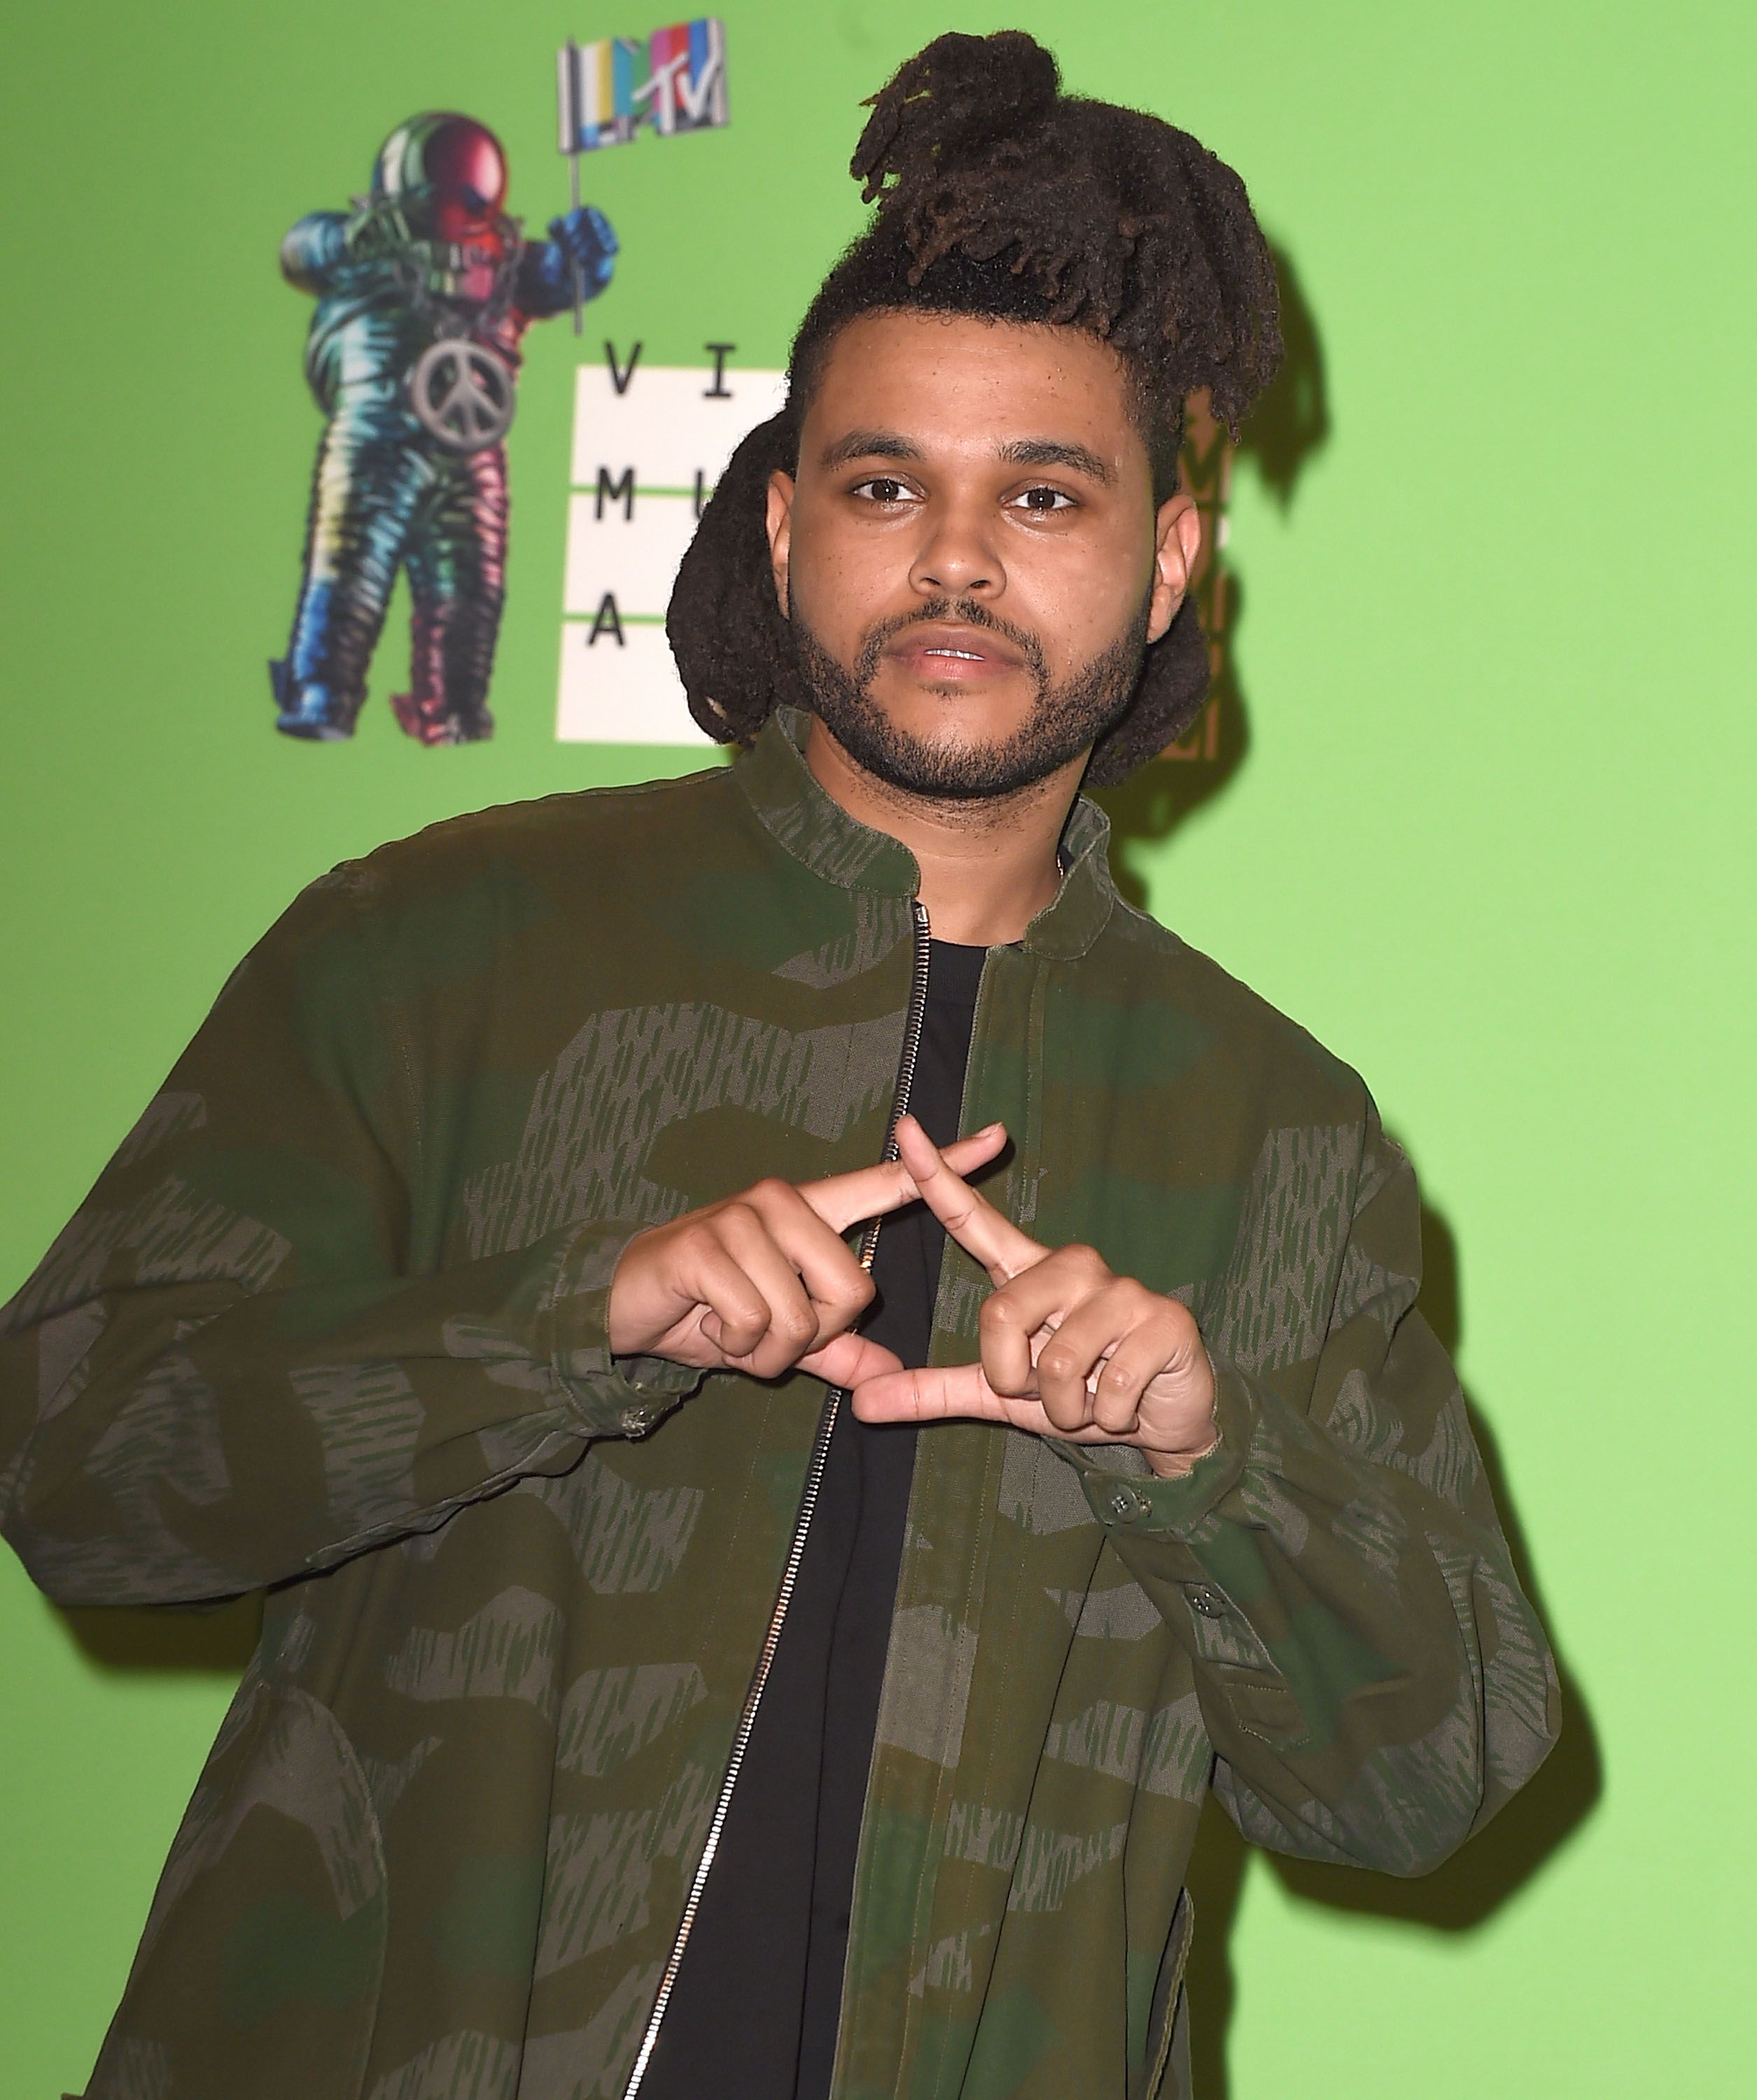 The Weeknd at the MTV Video Music Awards on August 30, 2015 | Photo: Getty Images